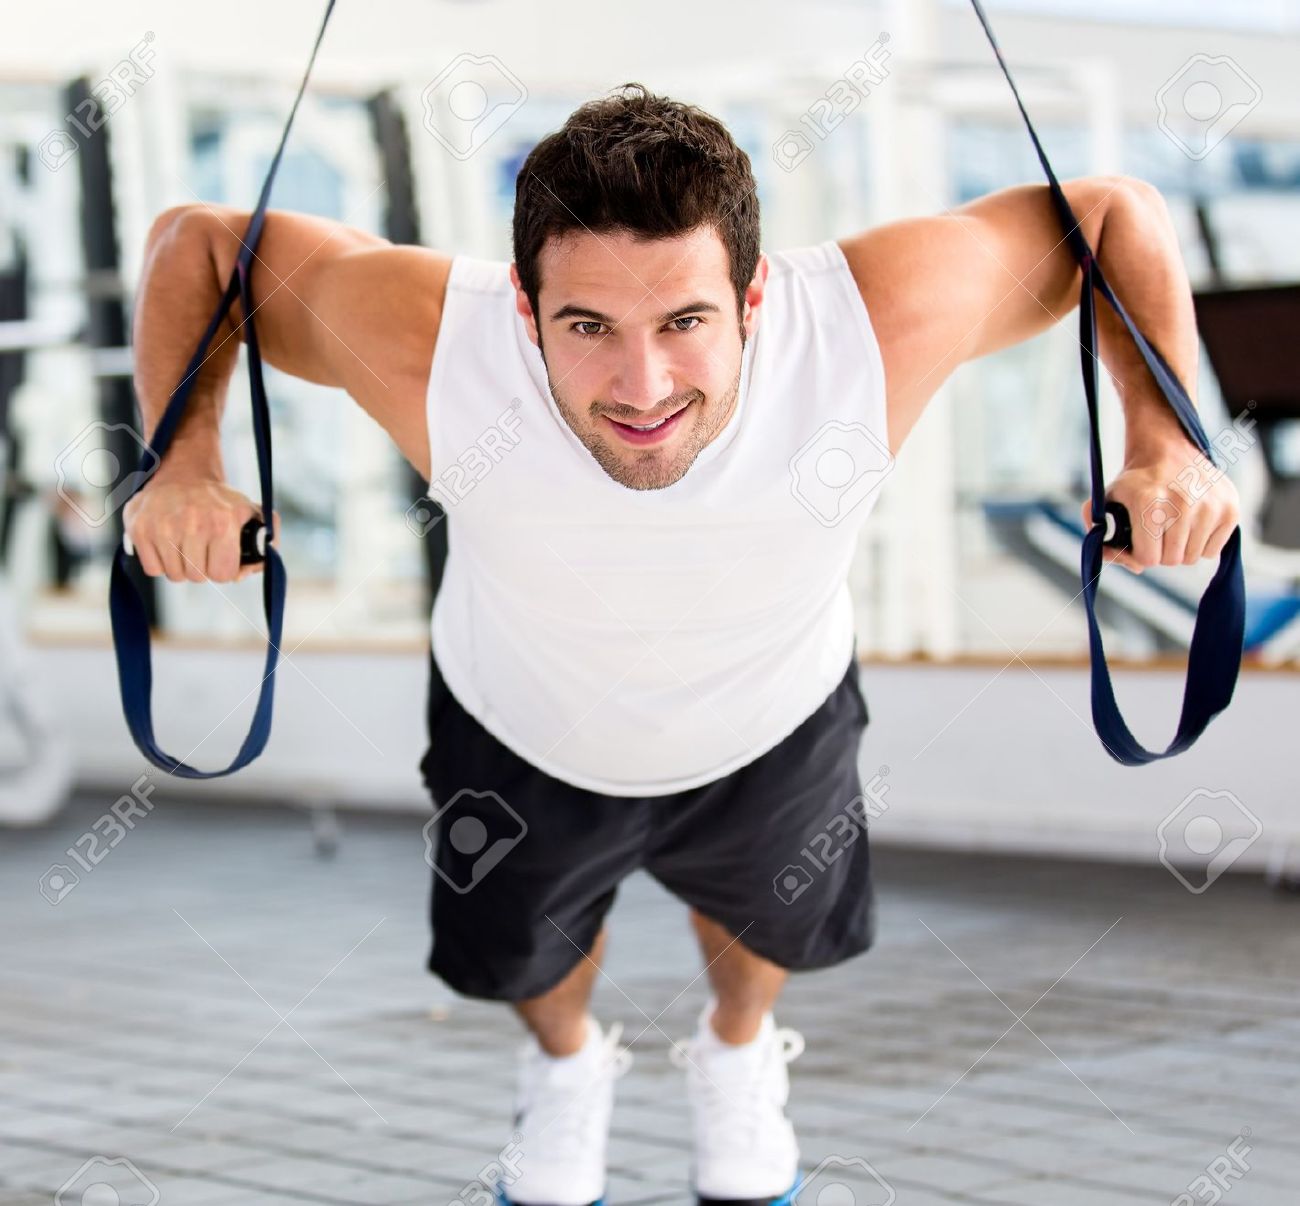 14710061-strong-handsome-man-exercising-at-the-gym-stock-photo-fitness